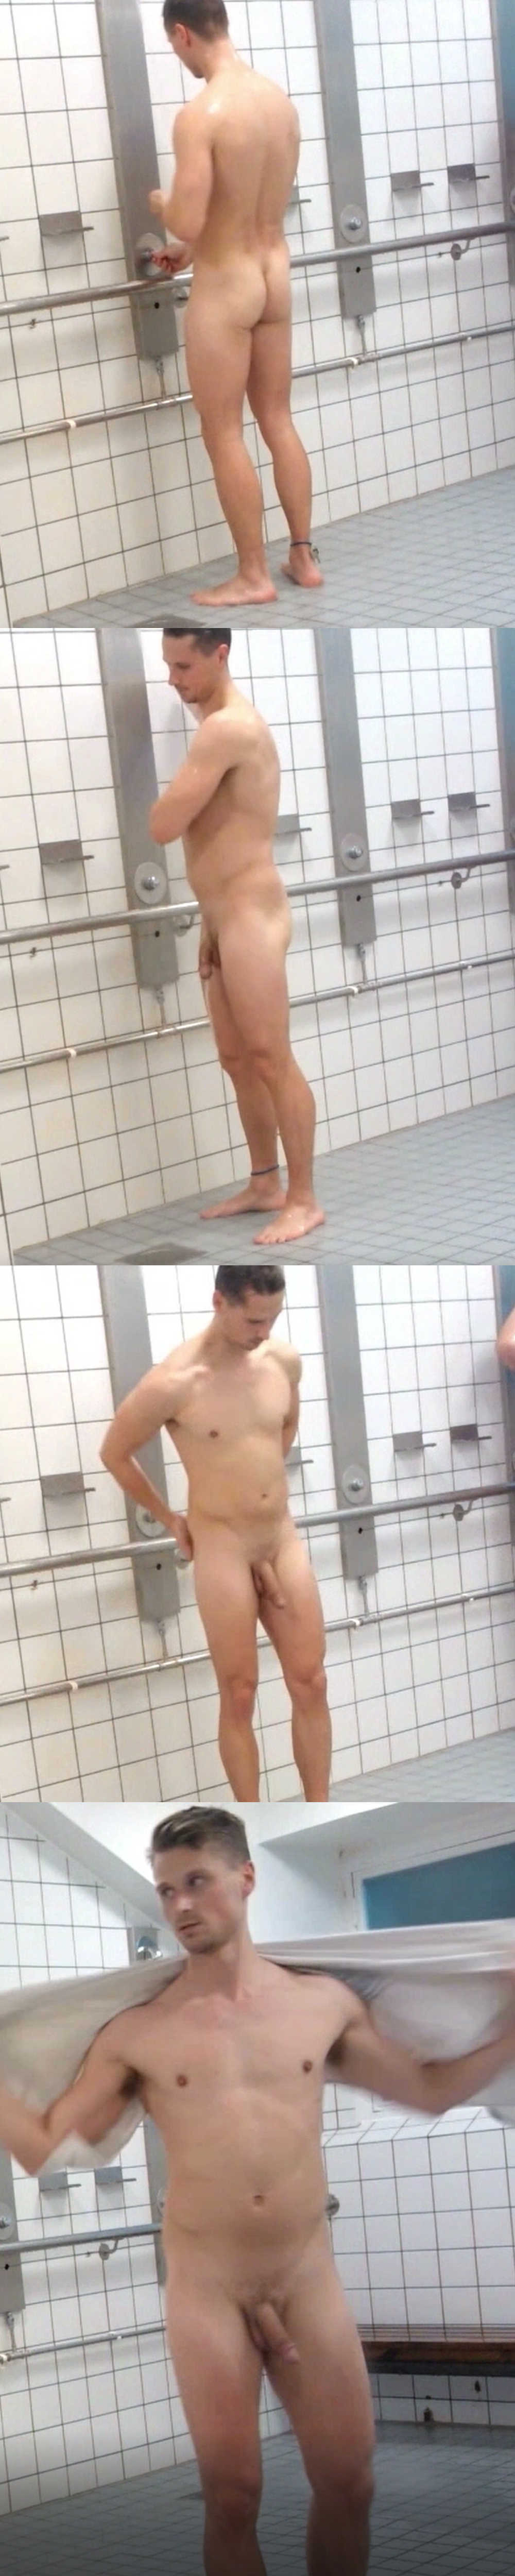 hung guy caught by hidden cam in communal shower